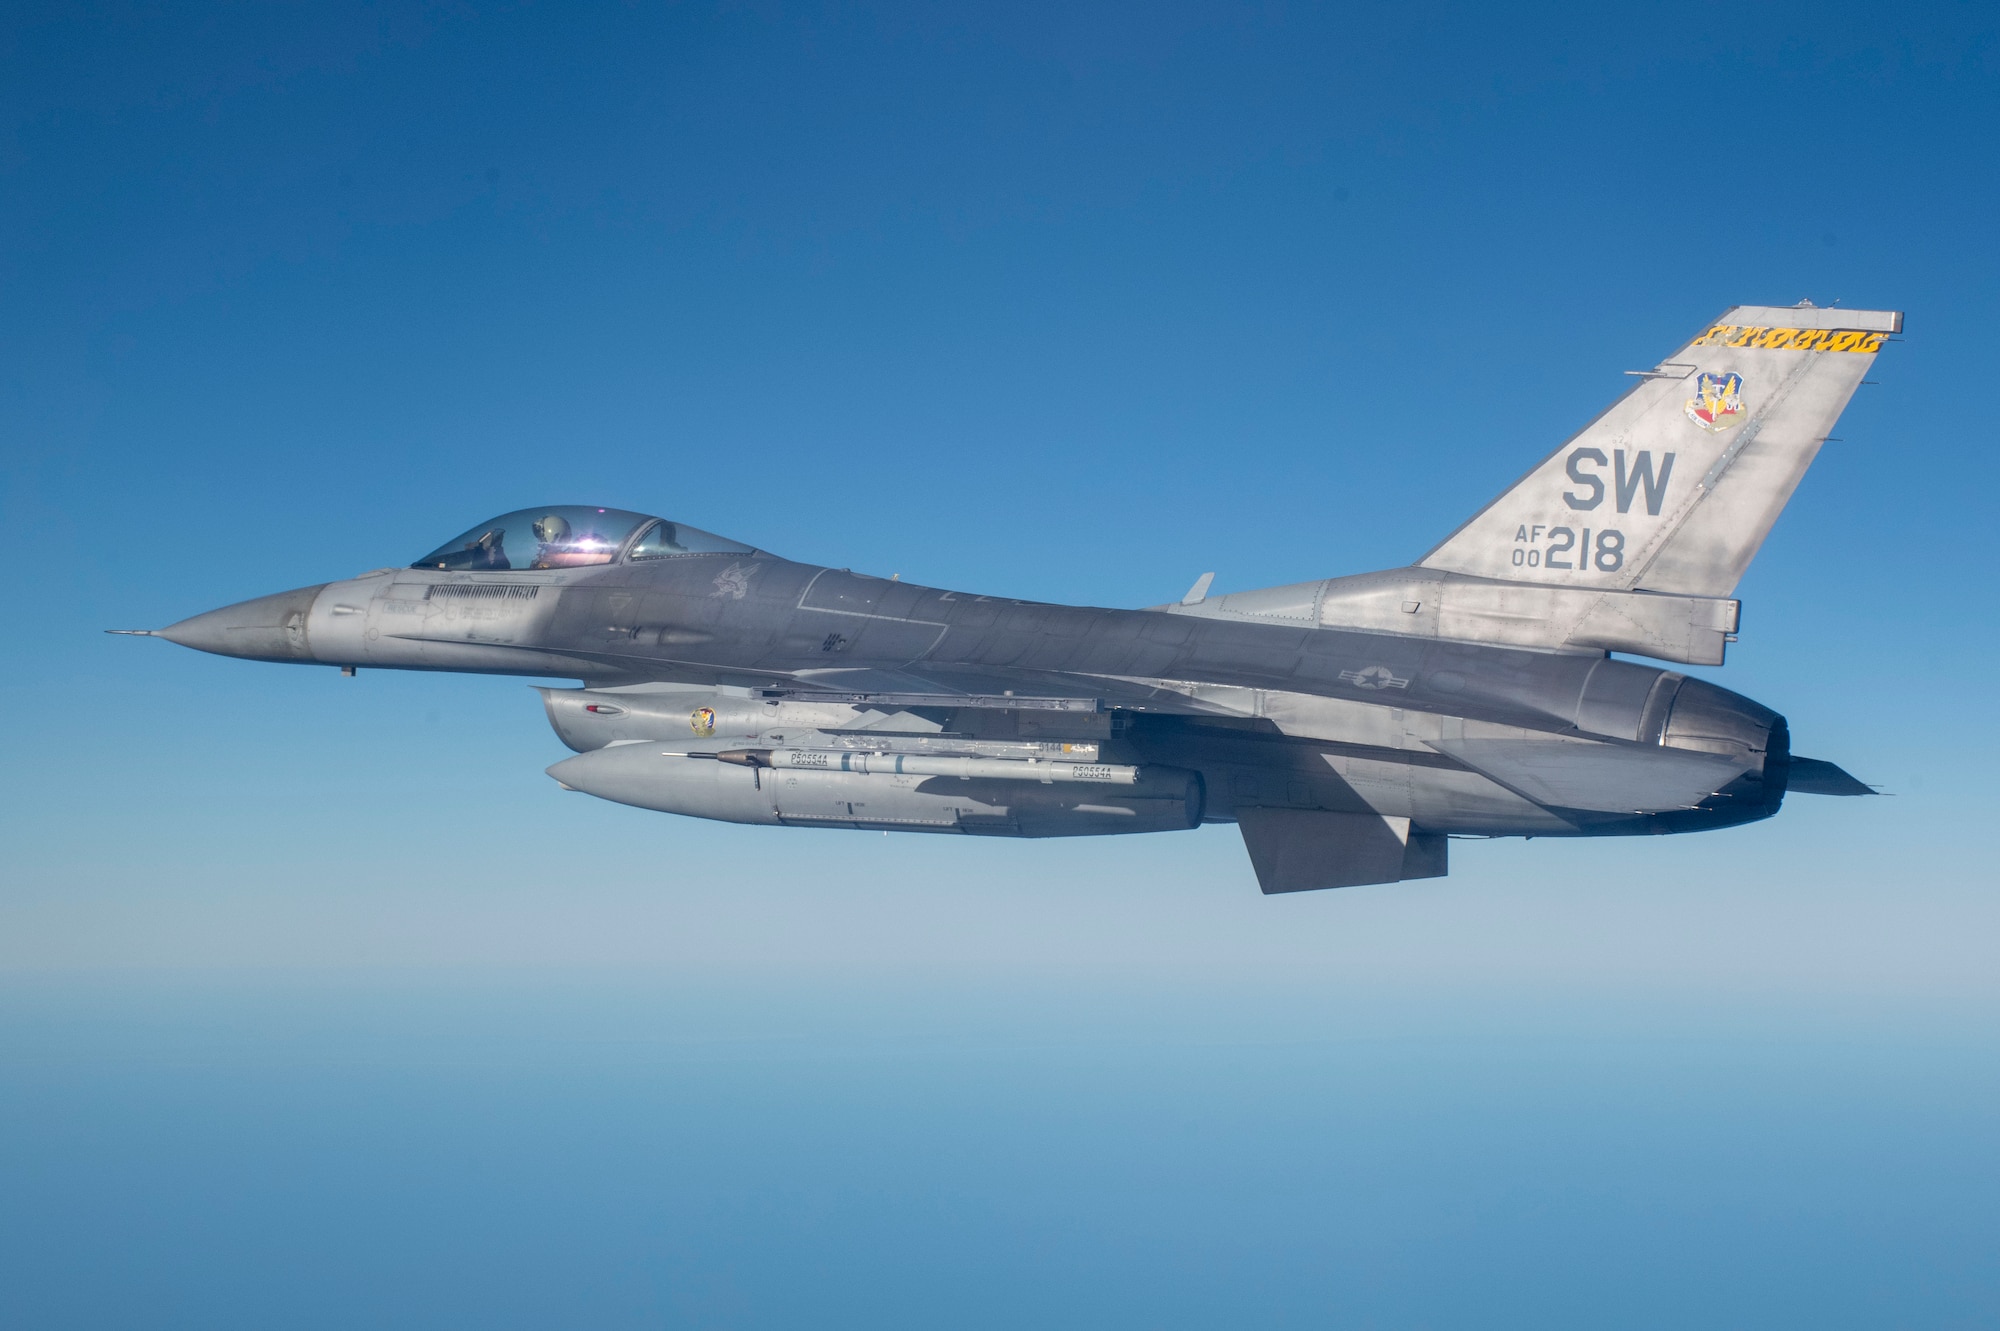 An F-16C Fighting Falcon assigned to the 79th Fighter Squadron participates in the 53rd Weapons Evaluation Group’s Weapons System Evaluation Program East 22.02, hosted at Tyndall Air Force Base, Fla., Nov. 16, 2021. During WSEP, units across the Department of Defense are evaluated on air-to-air combat capabilities. (U.S. Air Force photo by 1st Lt Lindsey Heflin)